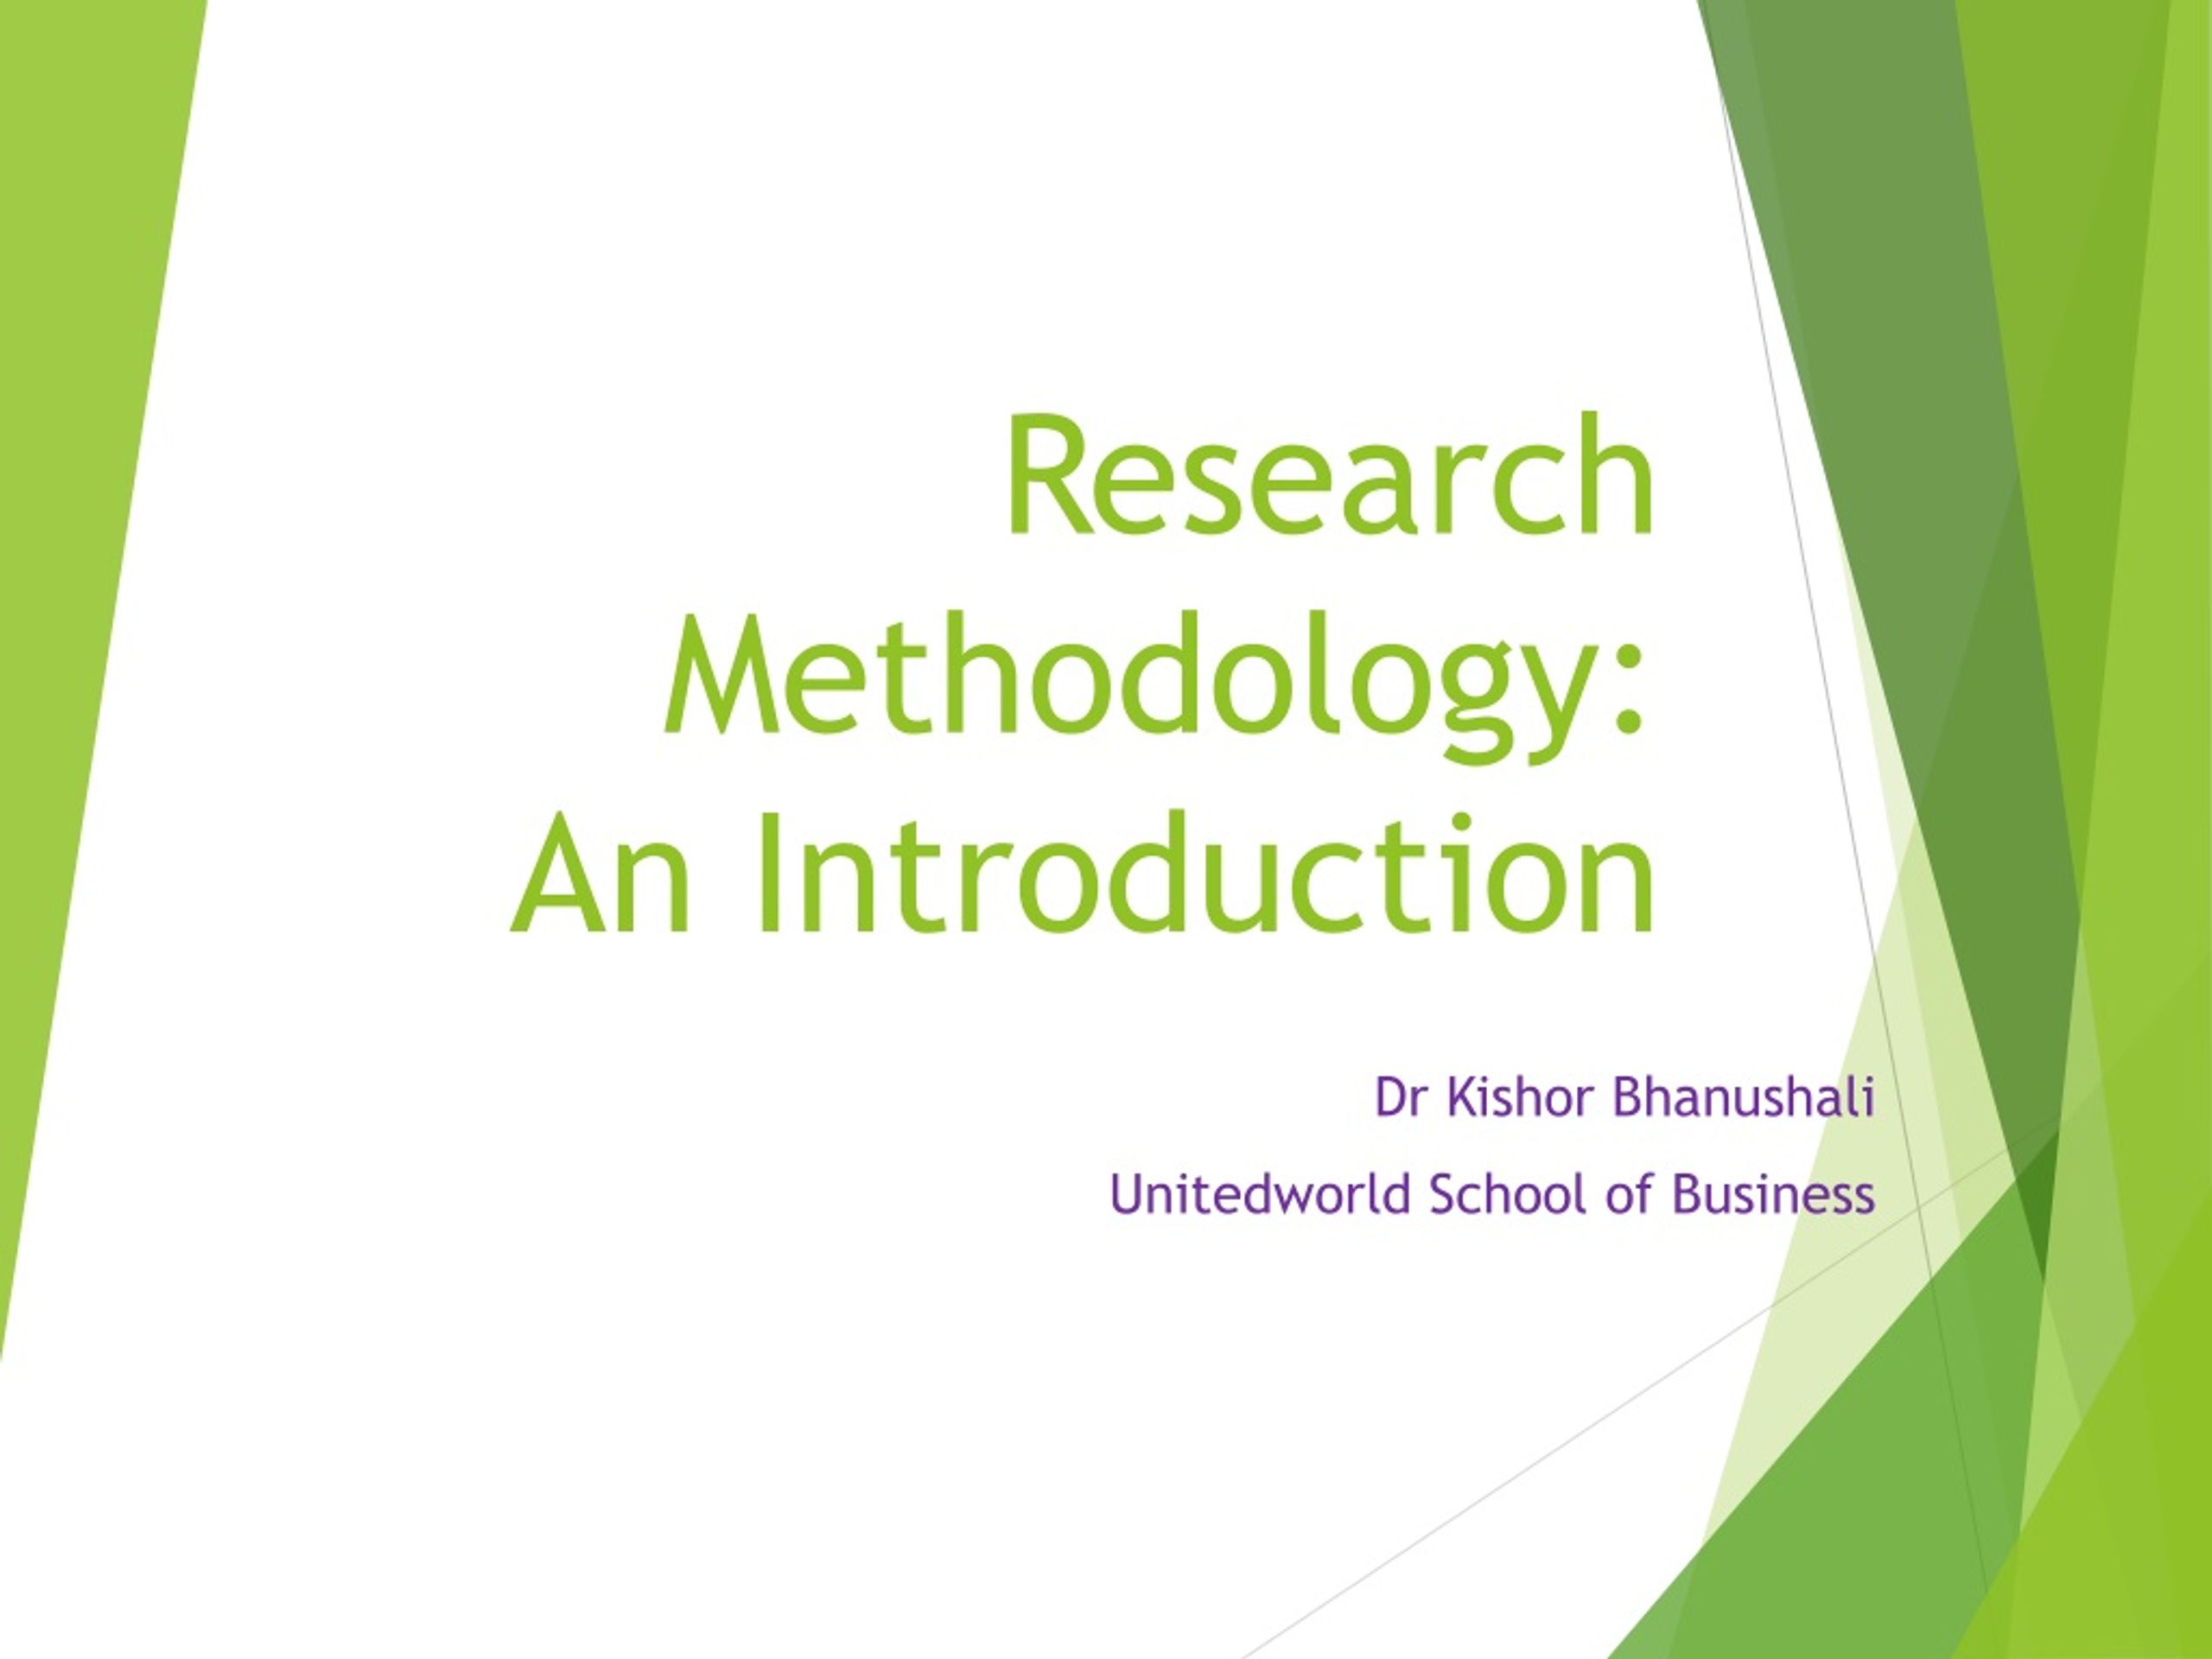 how to write introduction in research methodology